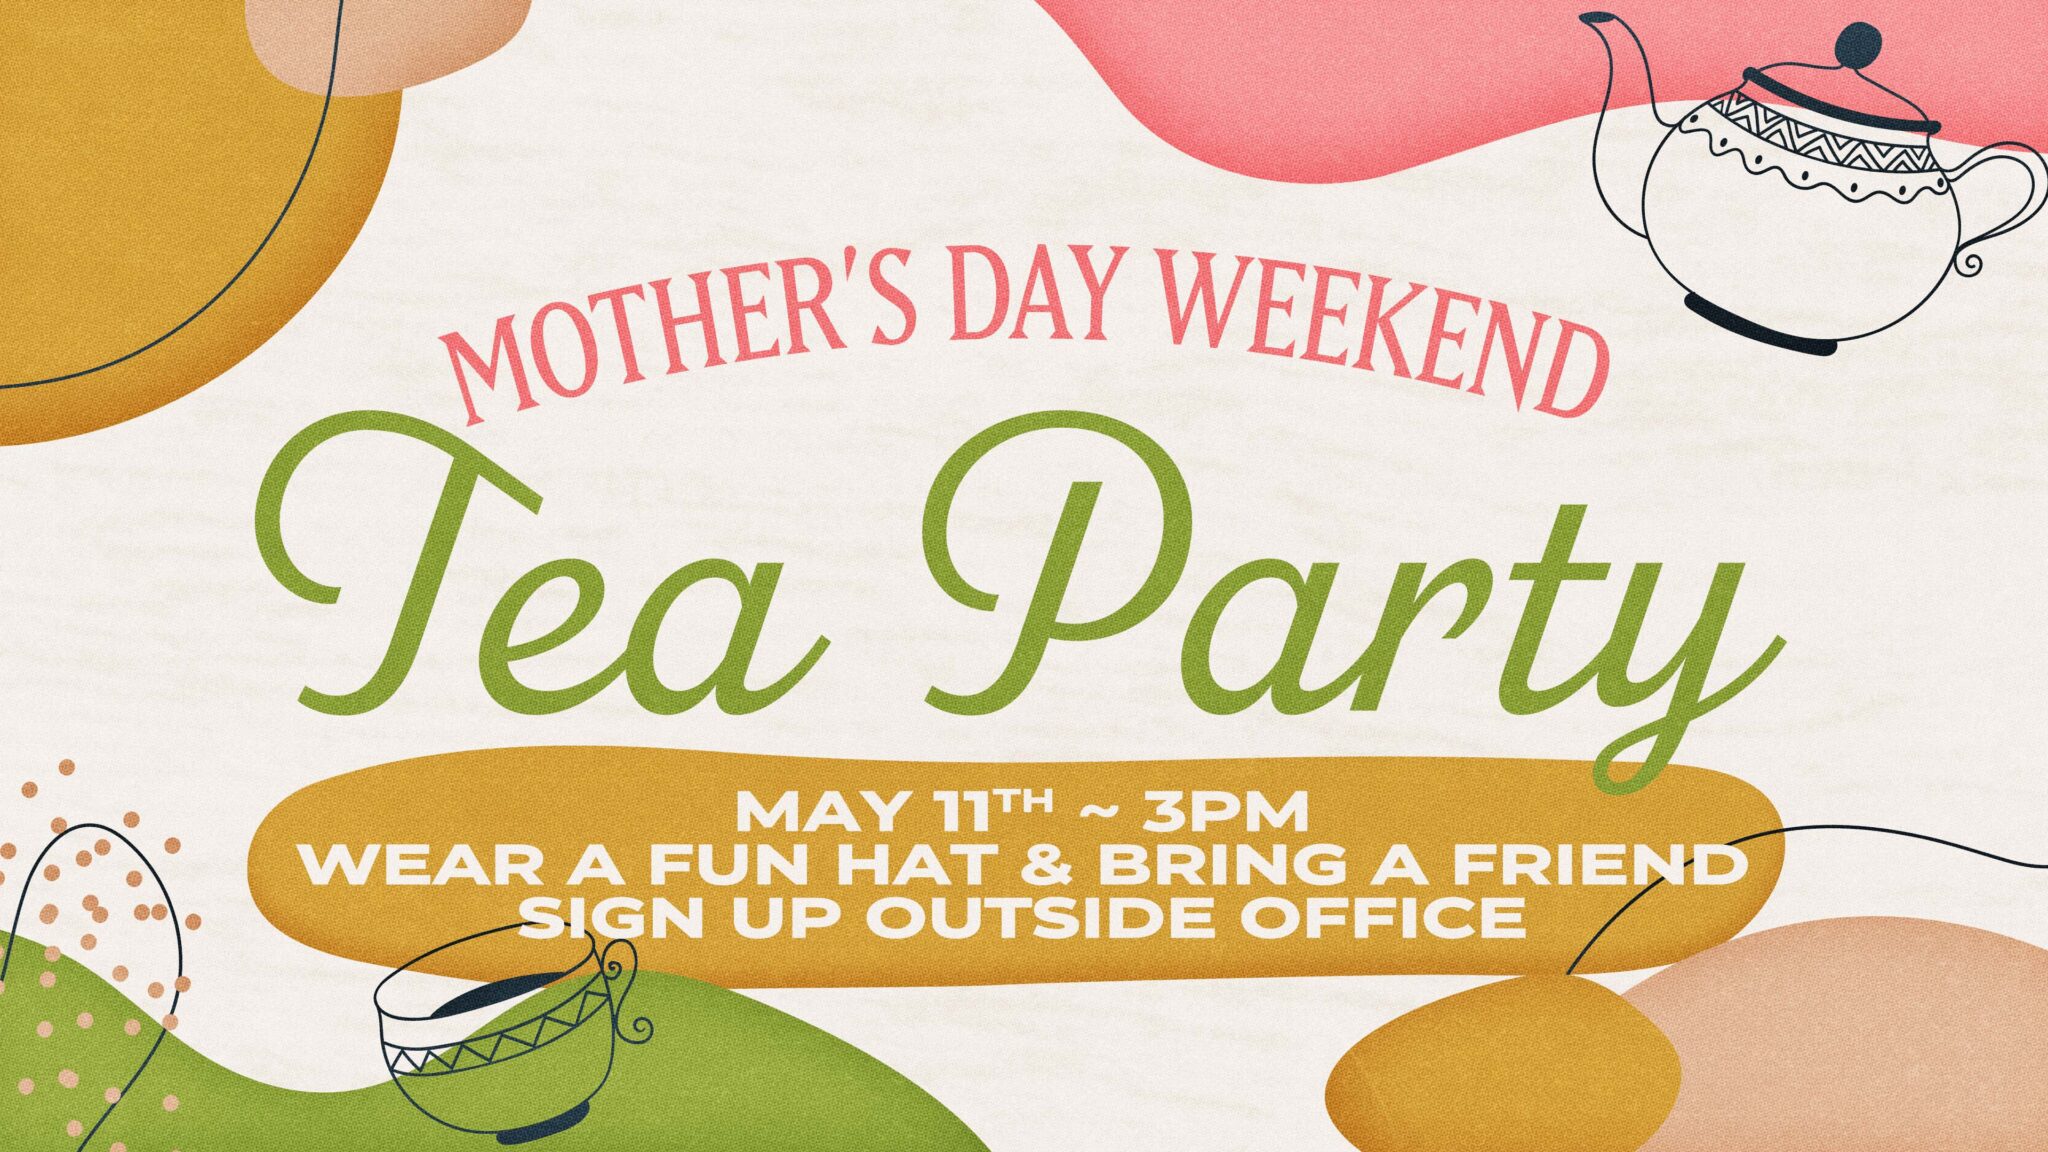 Mother's Day Weekend Tea Party